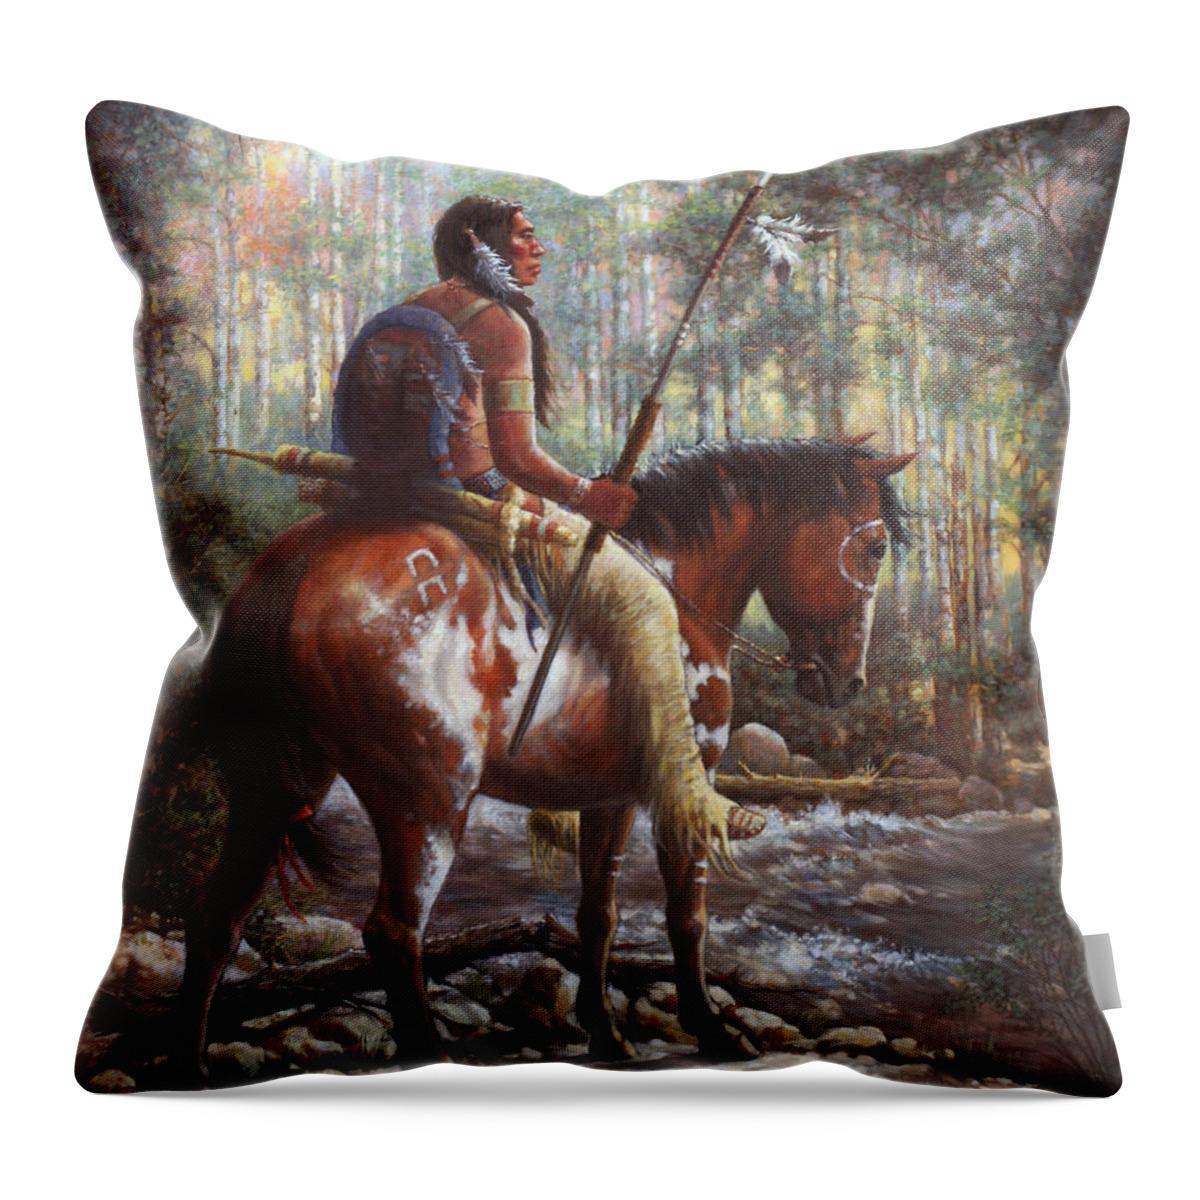 Indian Throw Pillow featuring the painting The Brave by Harvie Brown